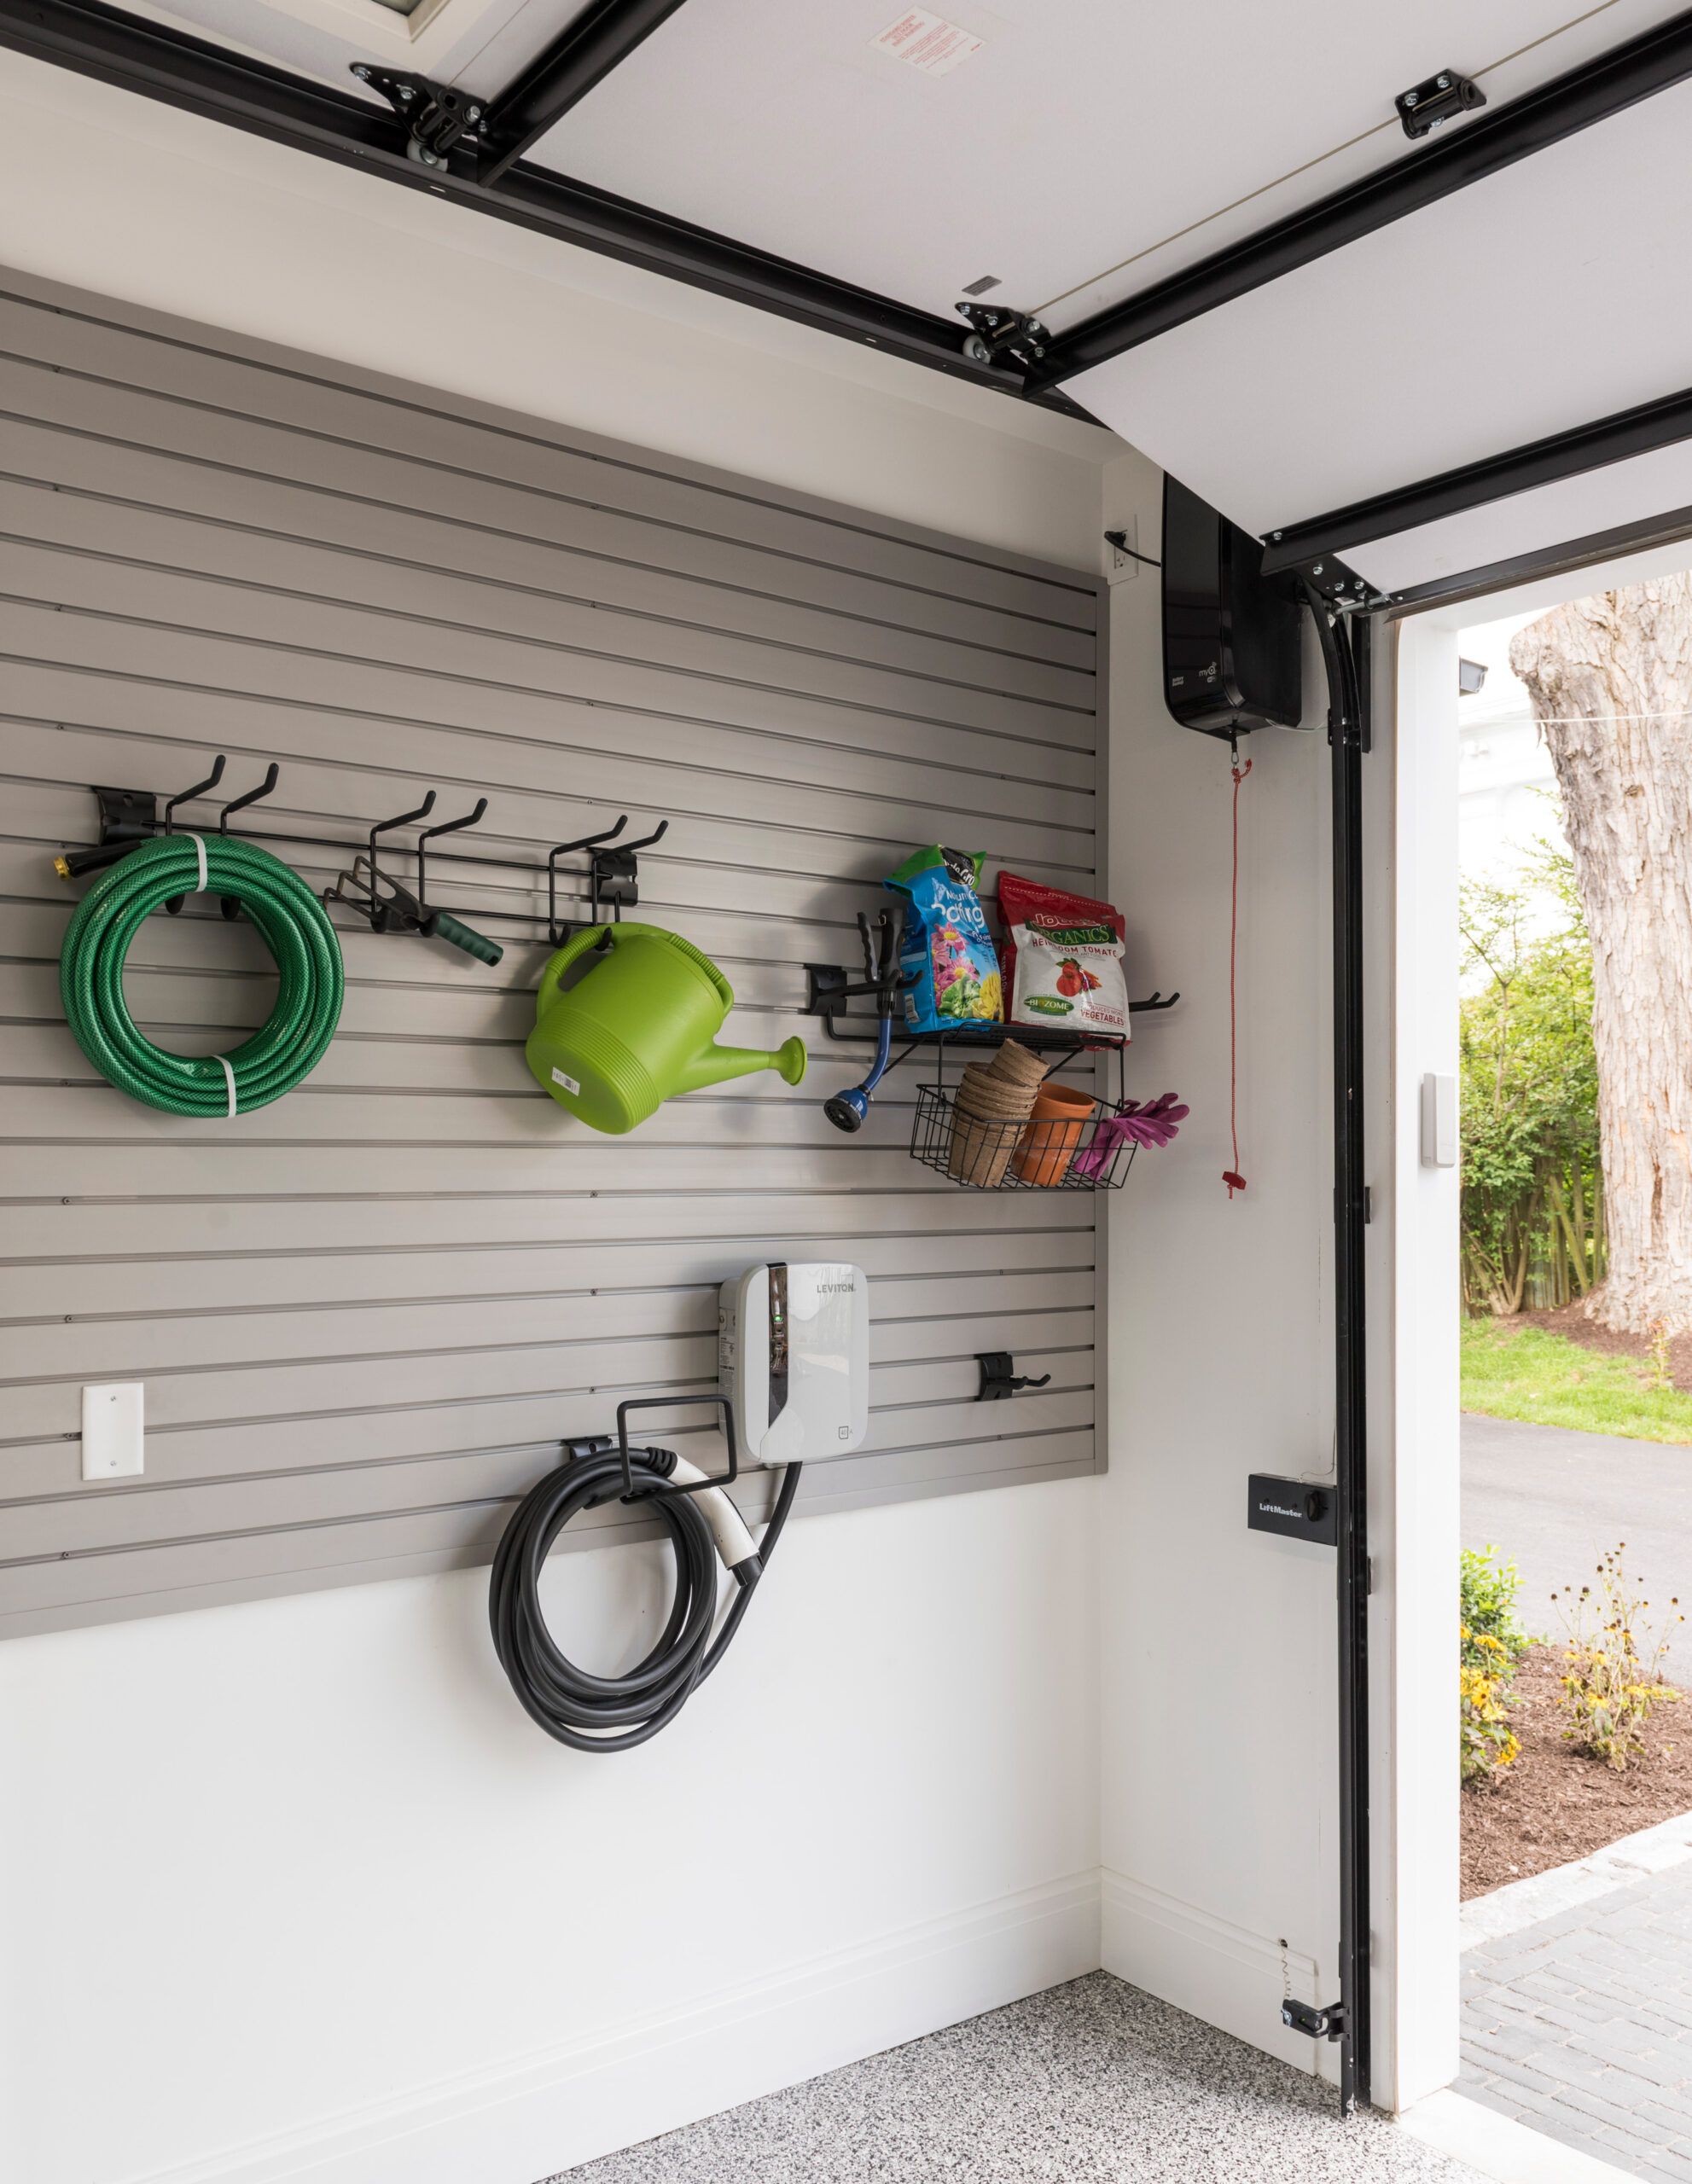 19 Garage Organization Ideas and Tips - This Old House